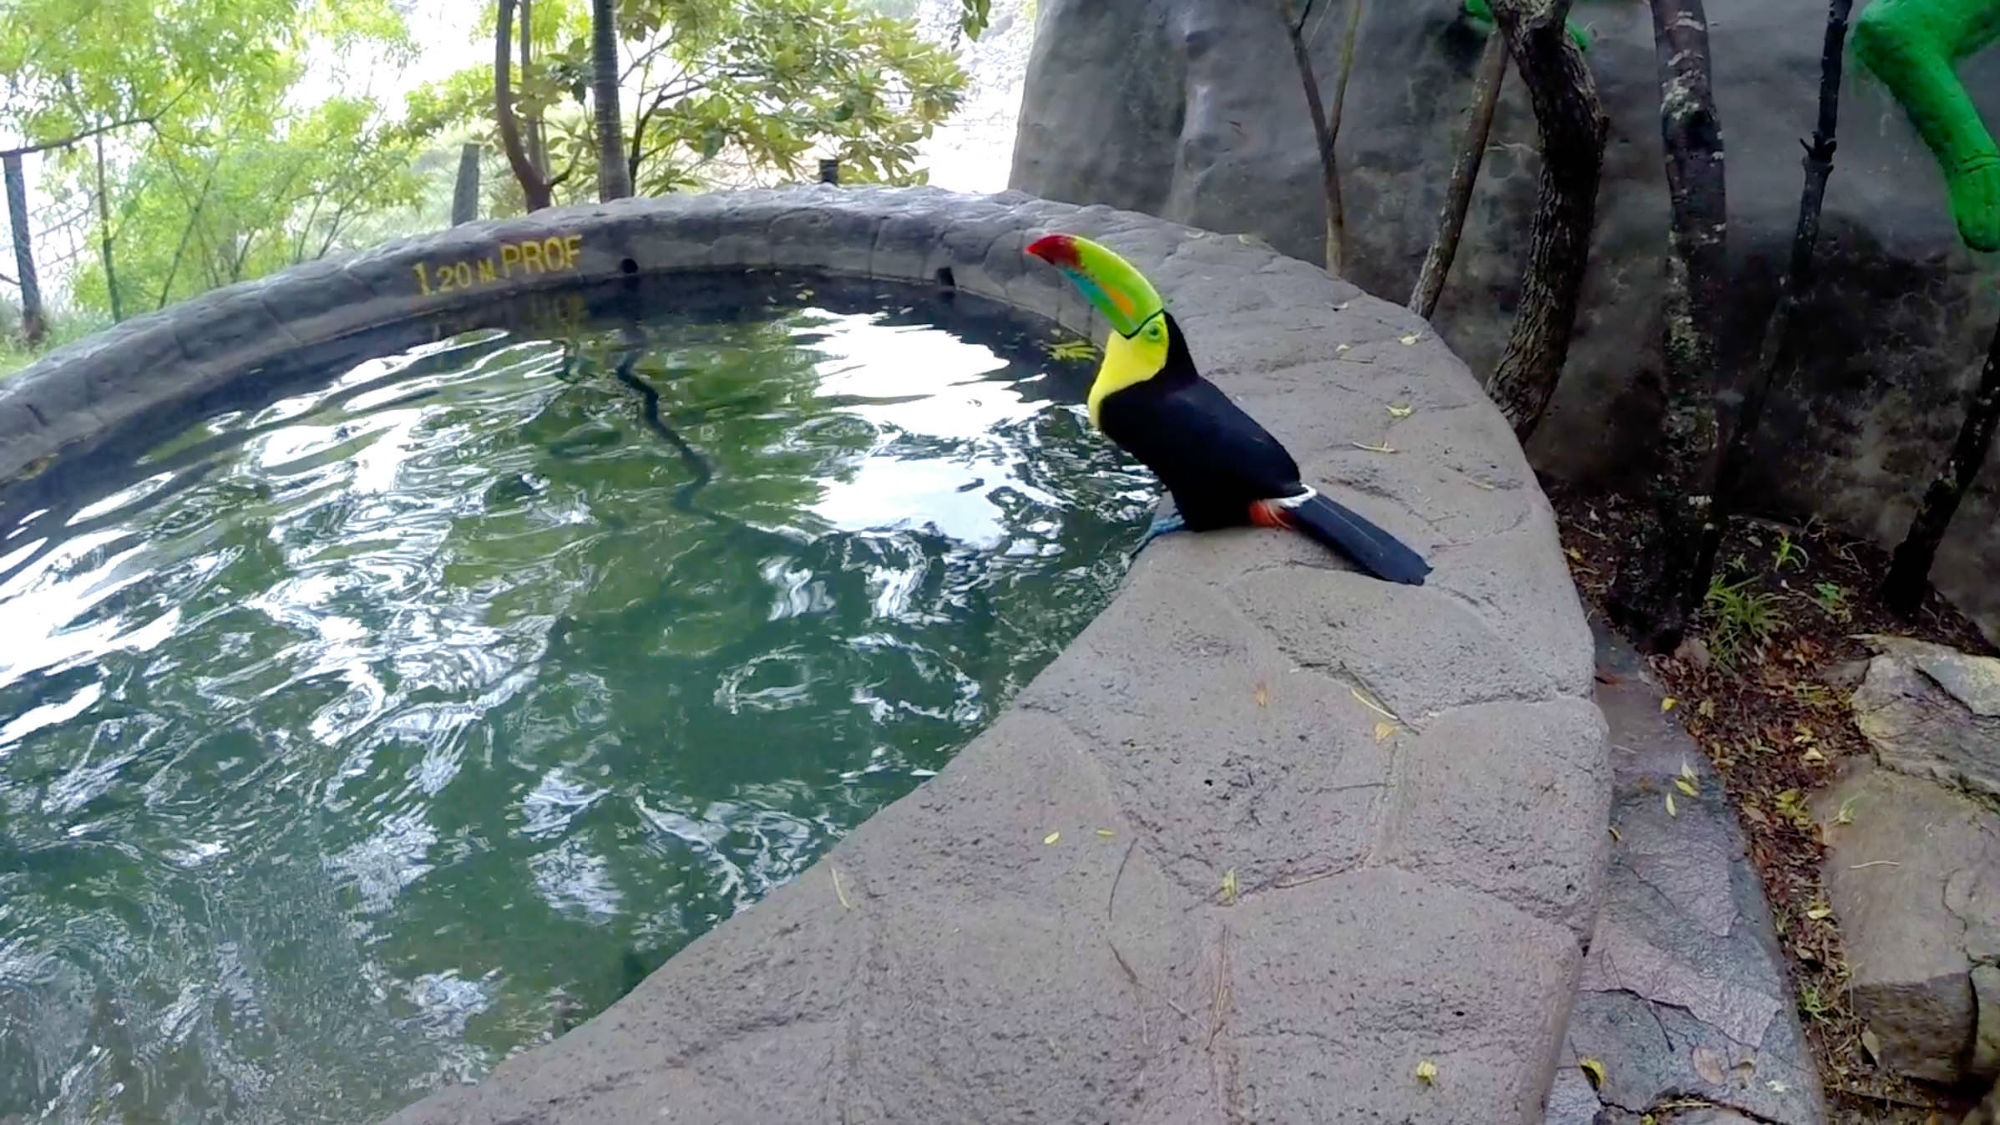 A Toucan at the Costa Rica Tour Pool